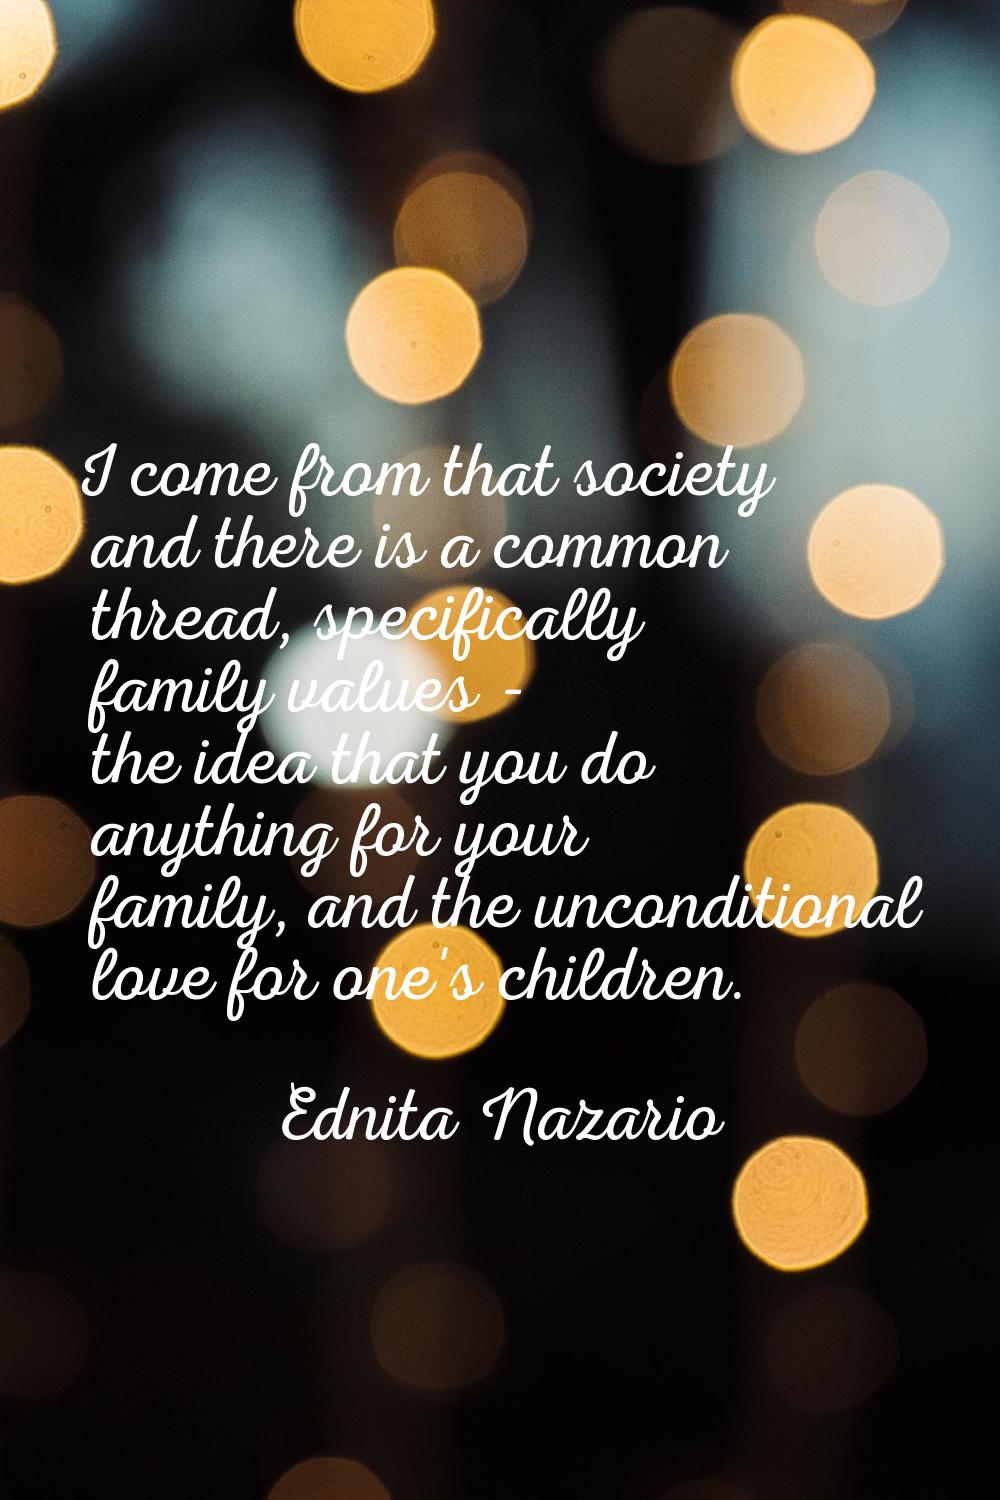 I come from that society and there is a common thread, specifically family values - the idea that y